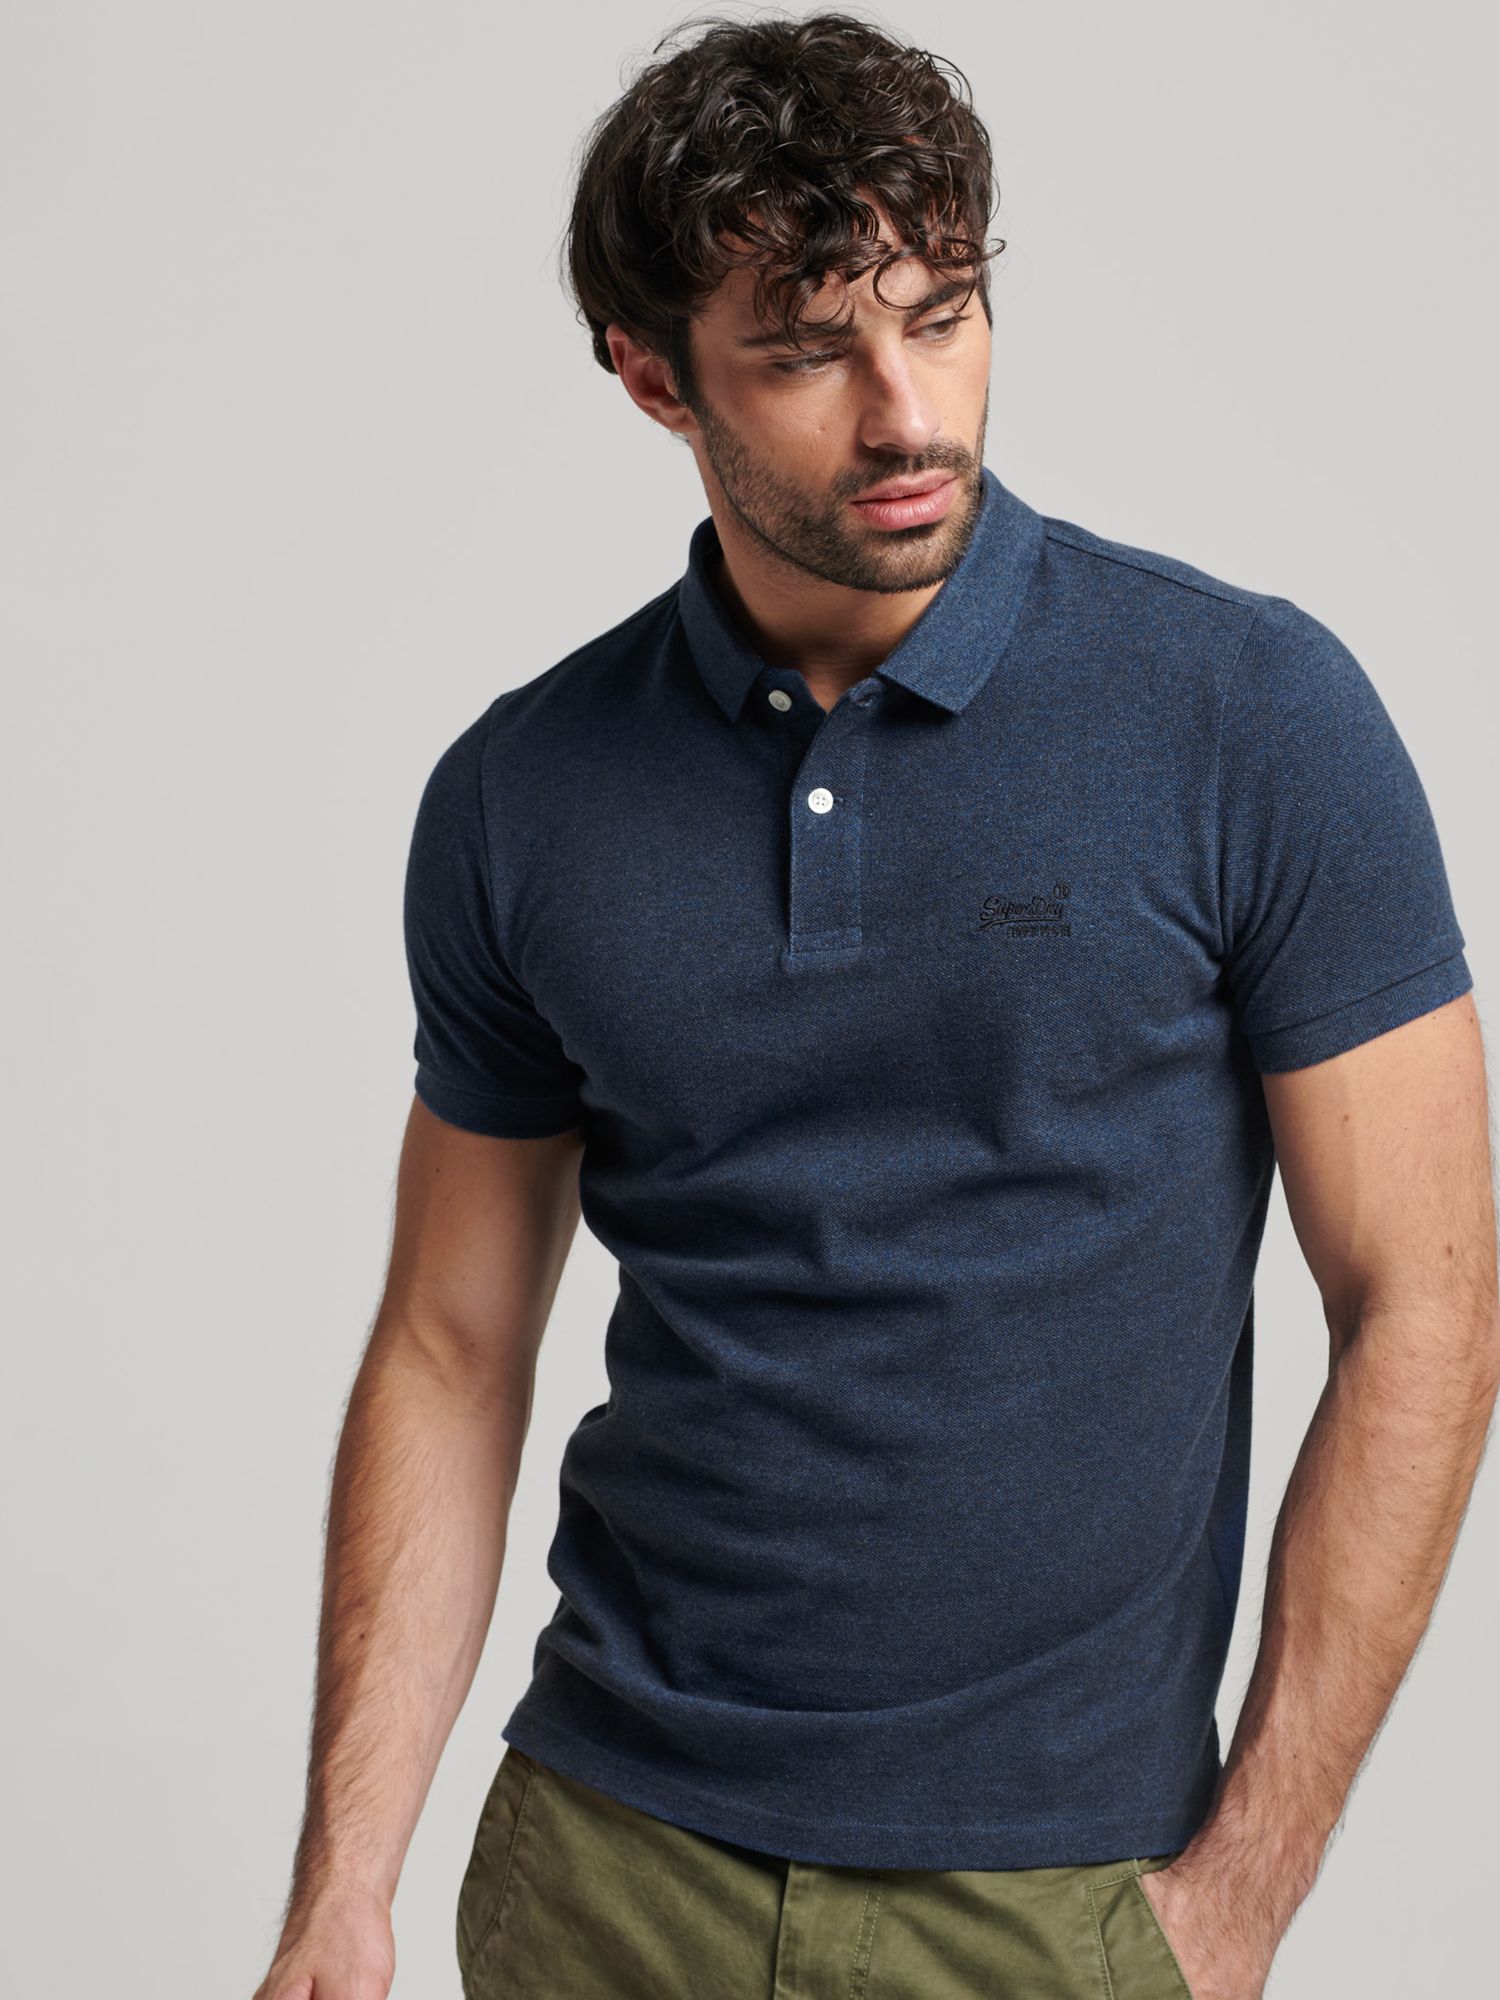 Superdry Classic Polo Partners John Blue & at Lewis Shirt, Pique Bright Marl